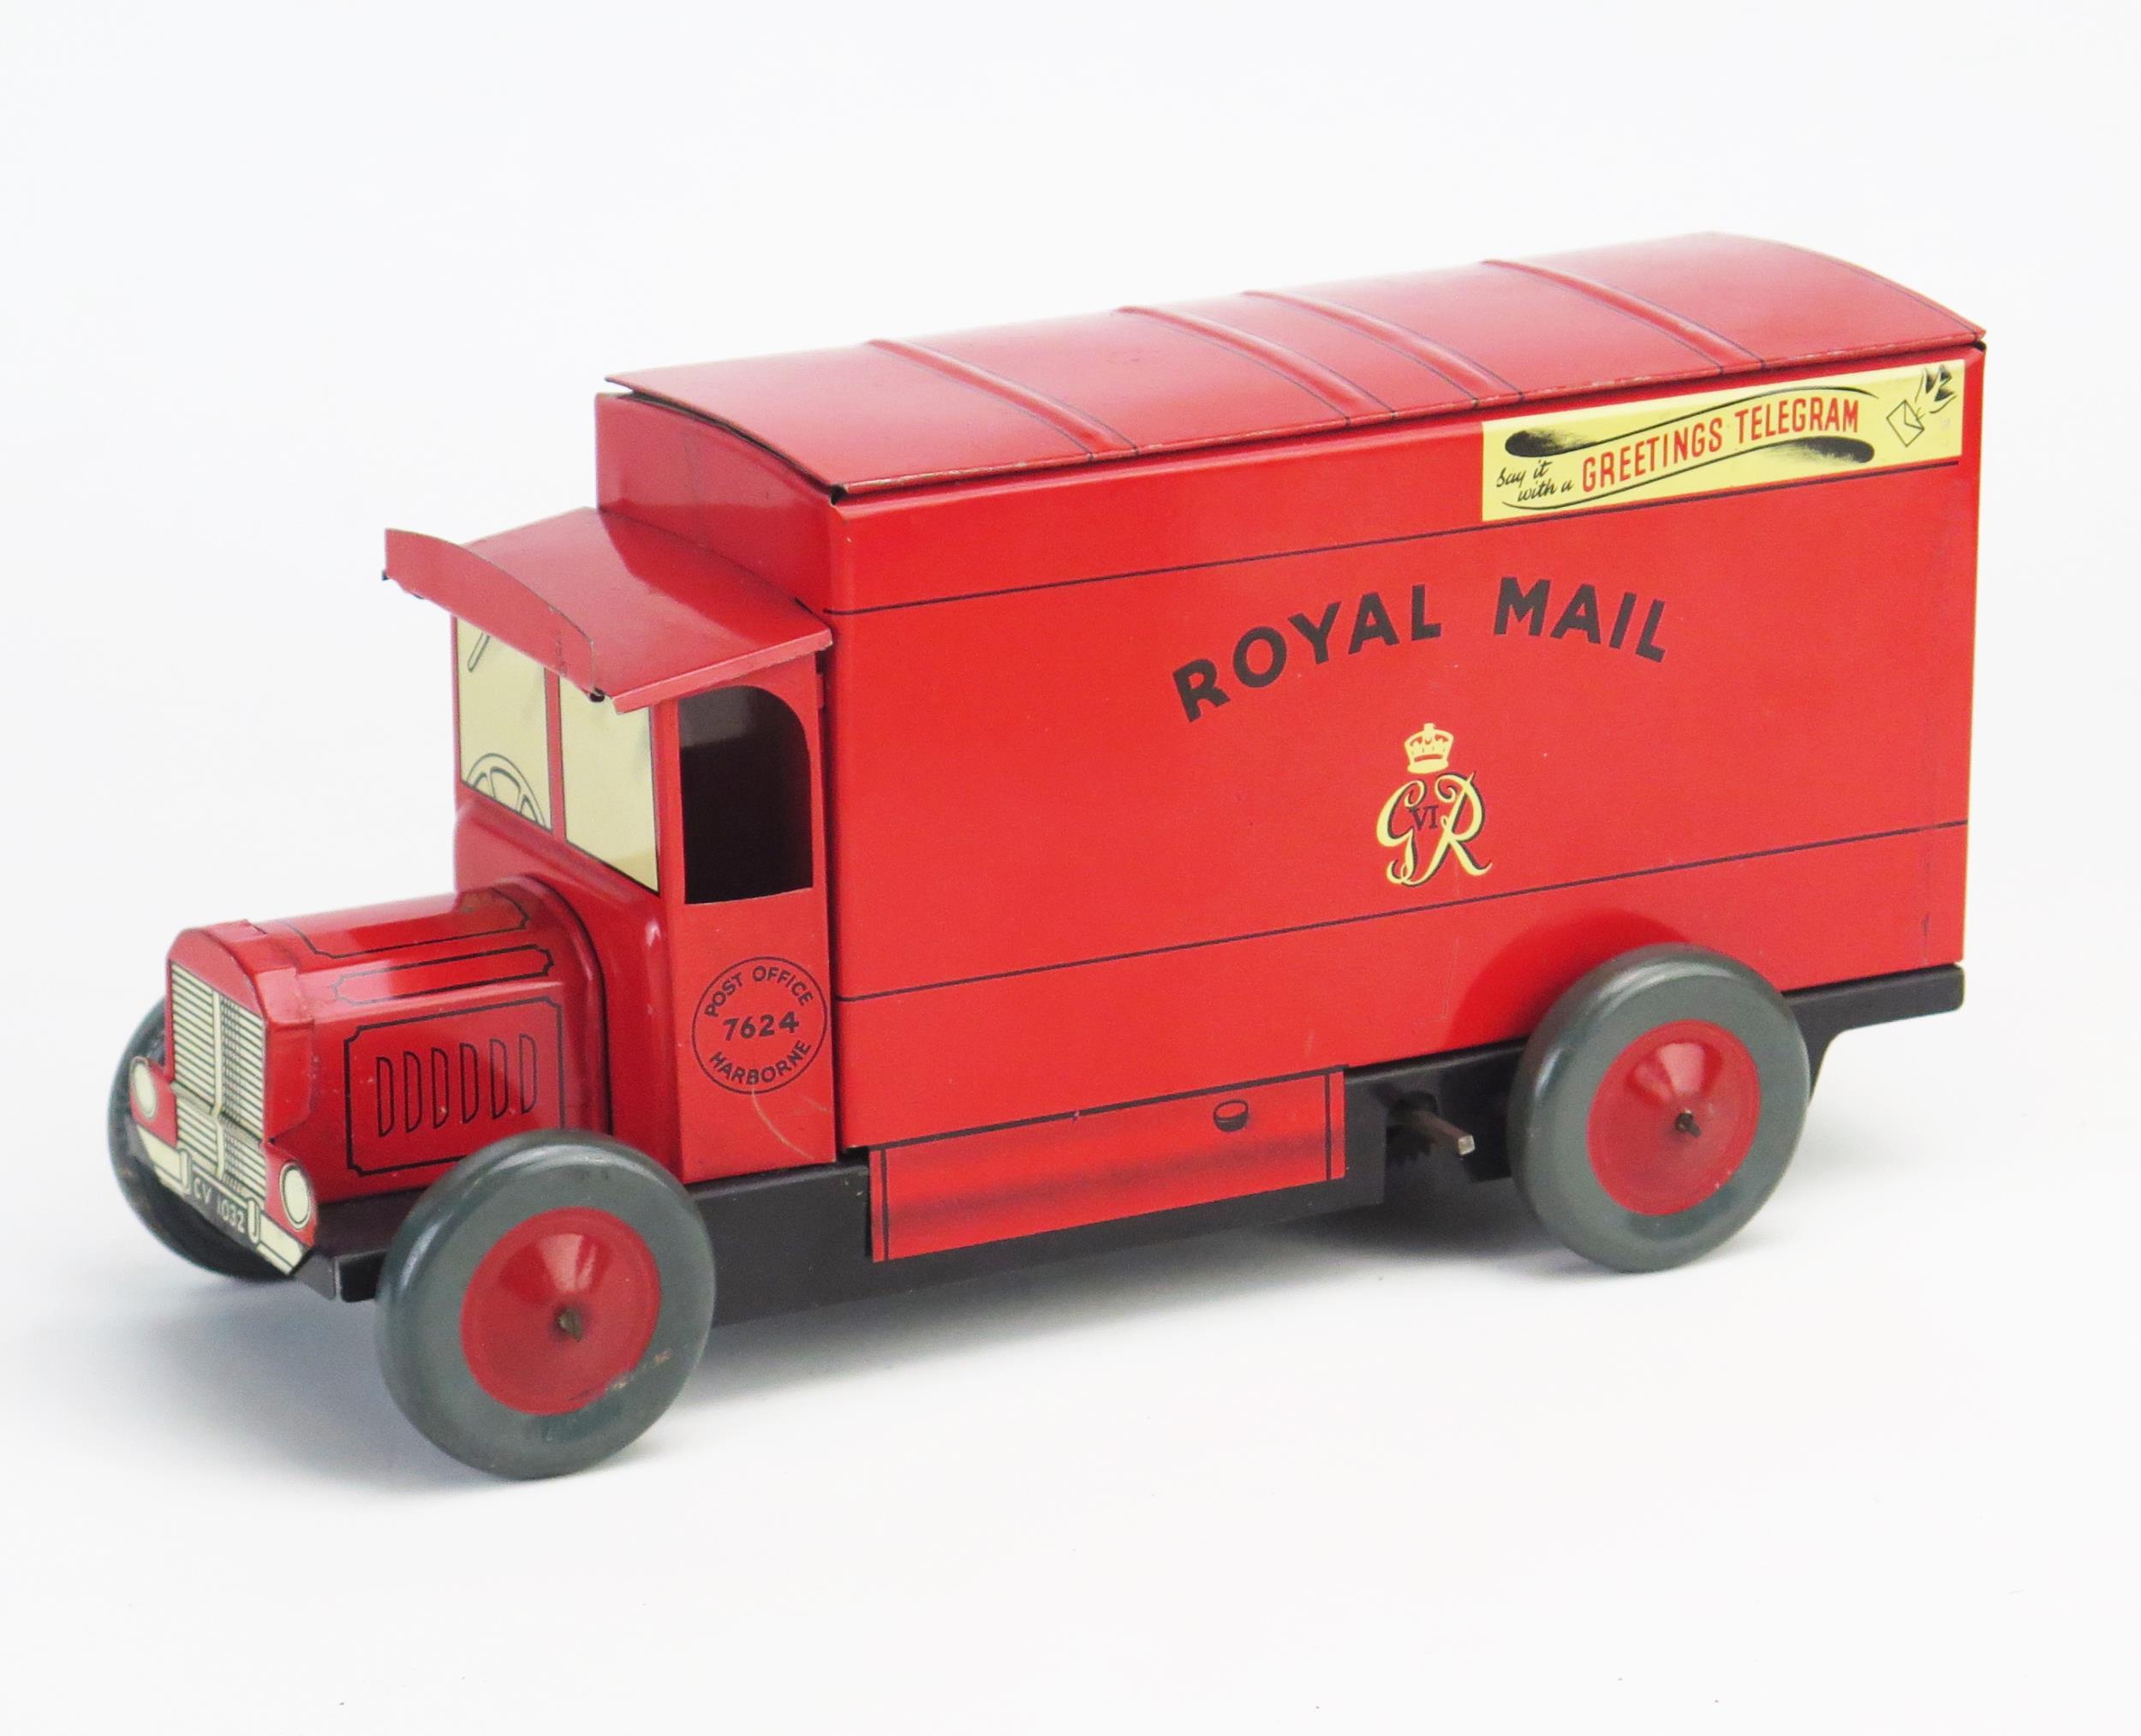 Rare Chad Valley Clockwork Tinplate Royal Mail Van CV 1032 in red "ROYAL MAIL" and "GR VI" crest